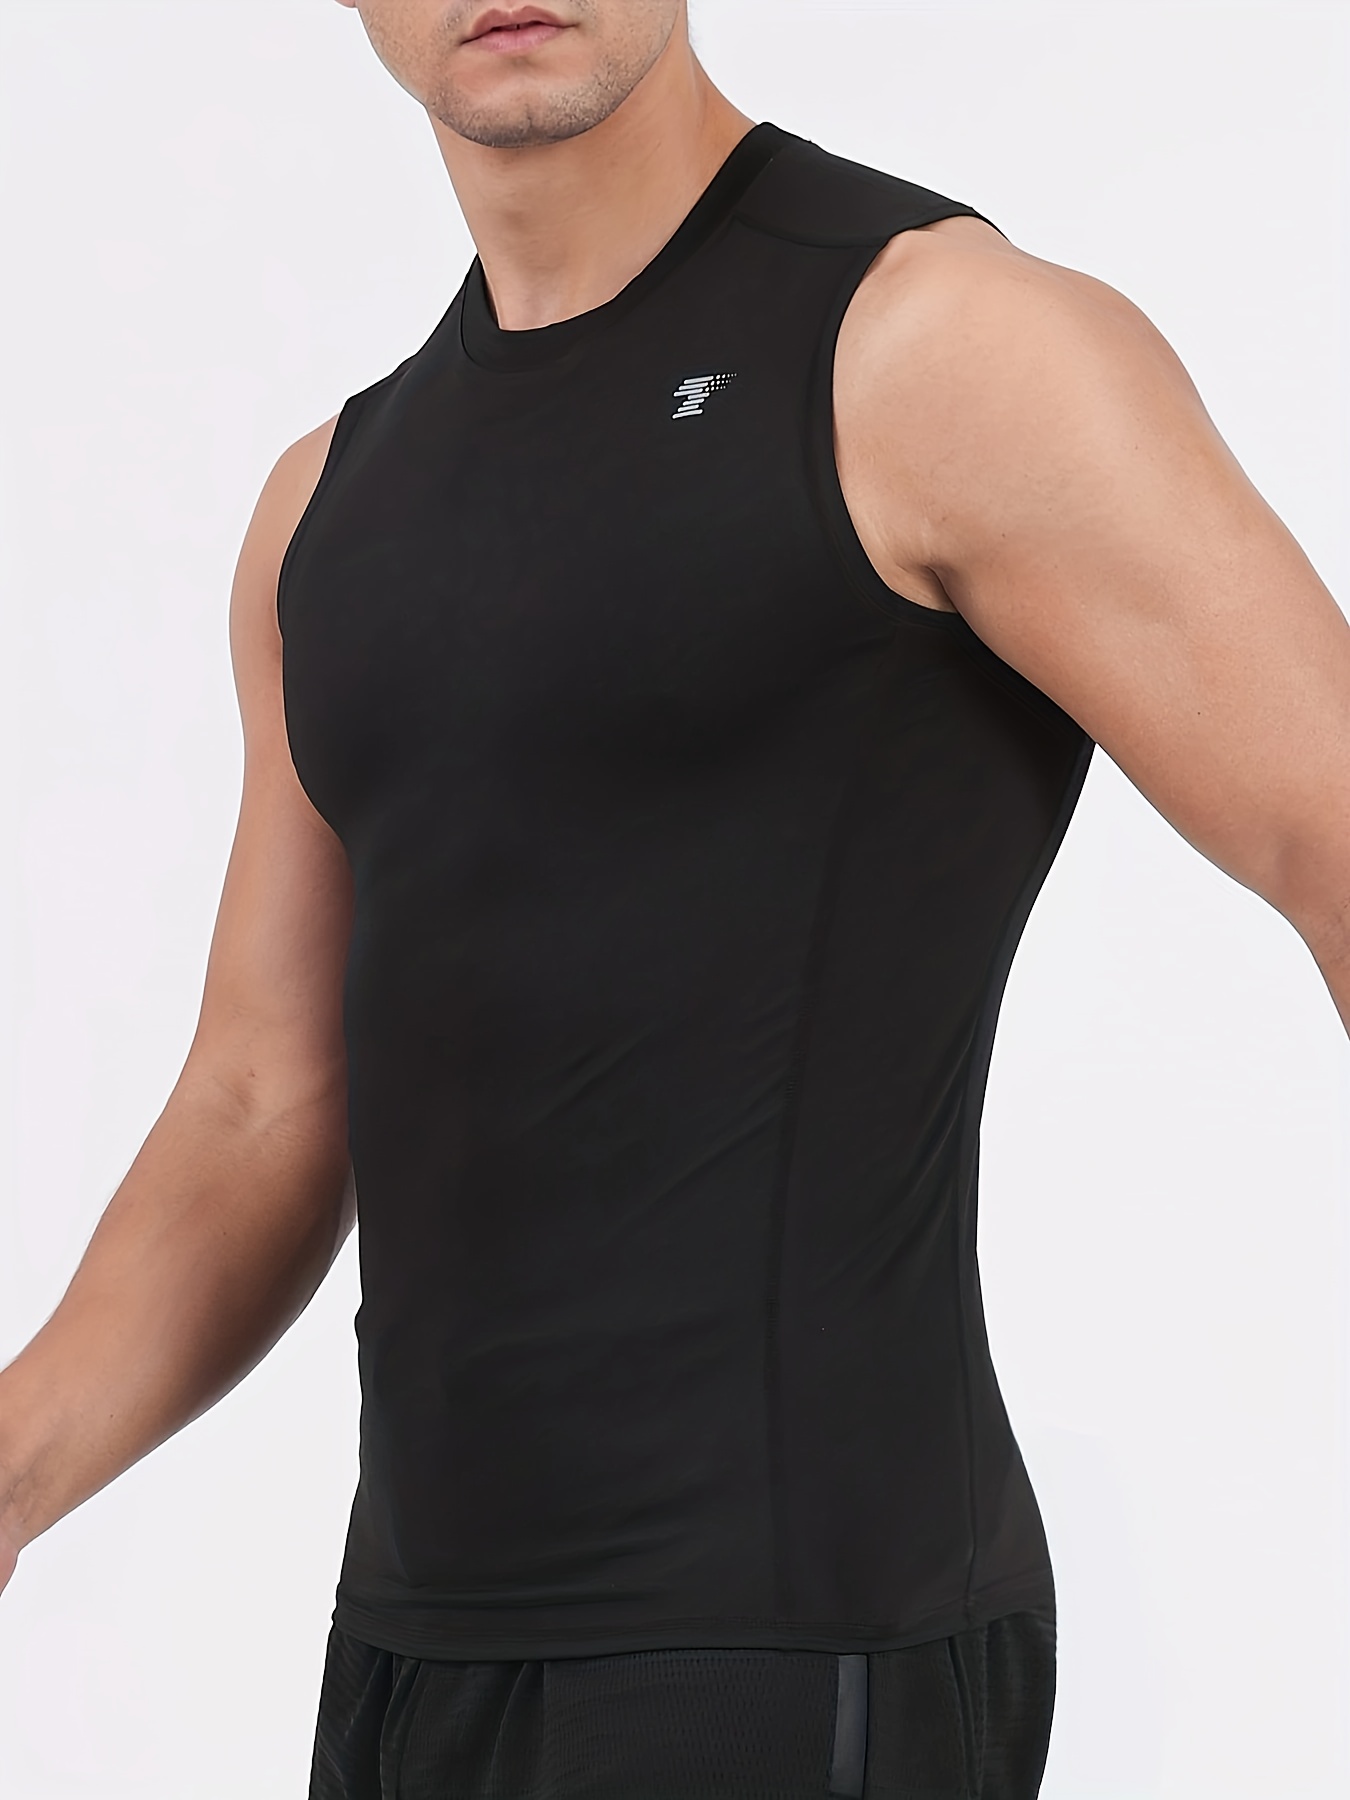 Men's Compression Tank Tops Slim Fit Athletic Muscle Tees Fitness  Sleeveless T-Shirt Cotton Breathable Sport Vest 